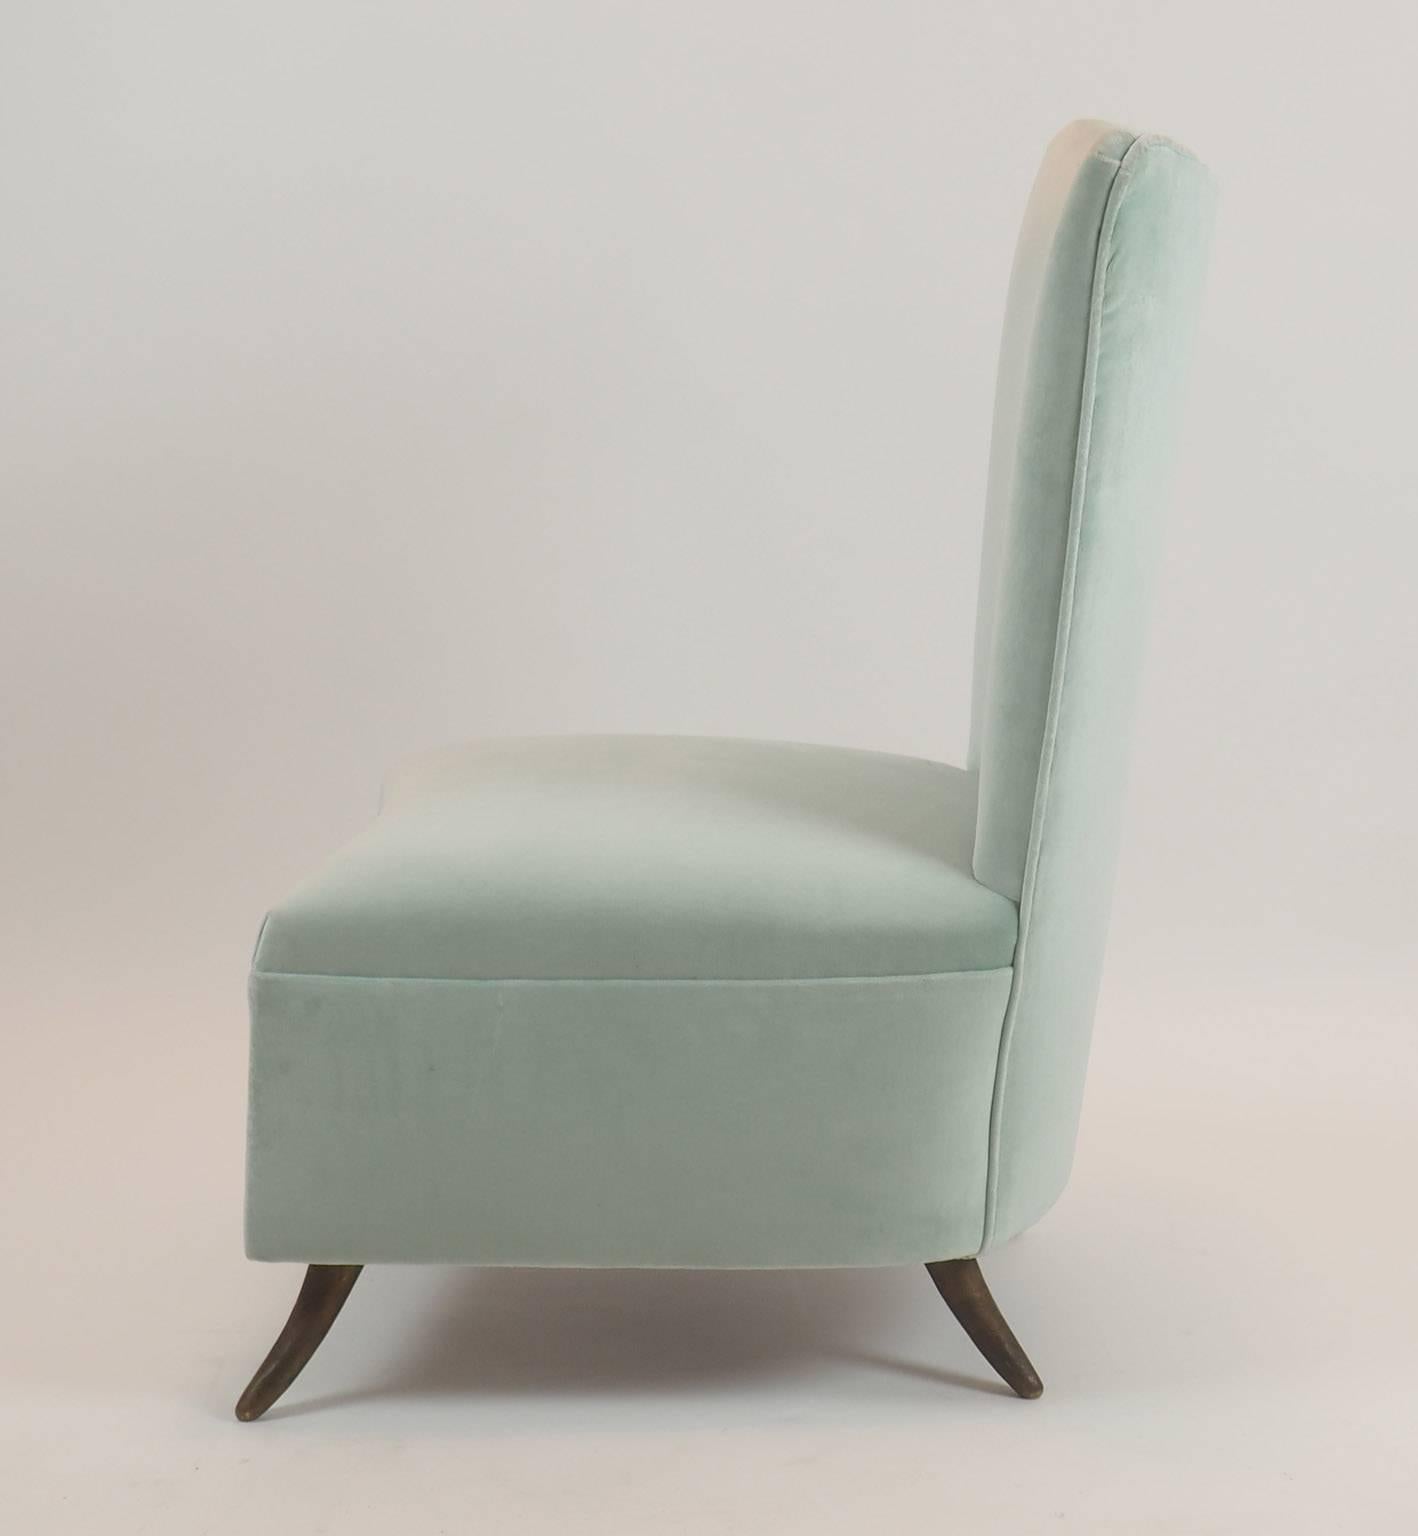 Turned Gio Ponti Attributed Slipping Chair Manufactured by ISA Bergamo, Italy, 1950s